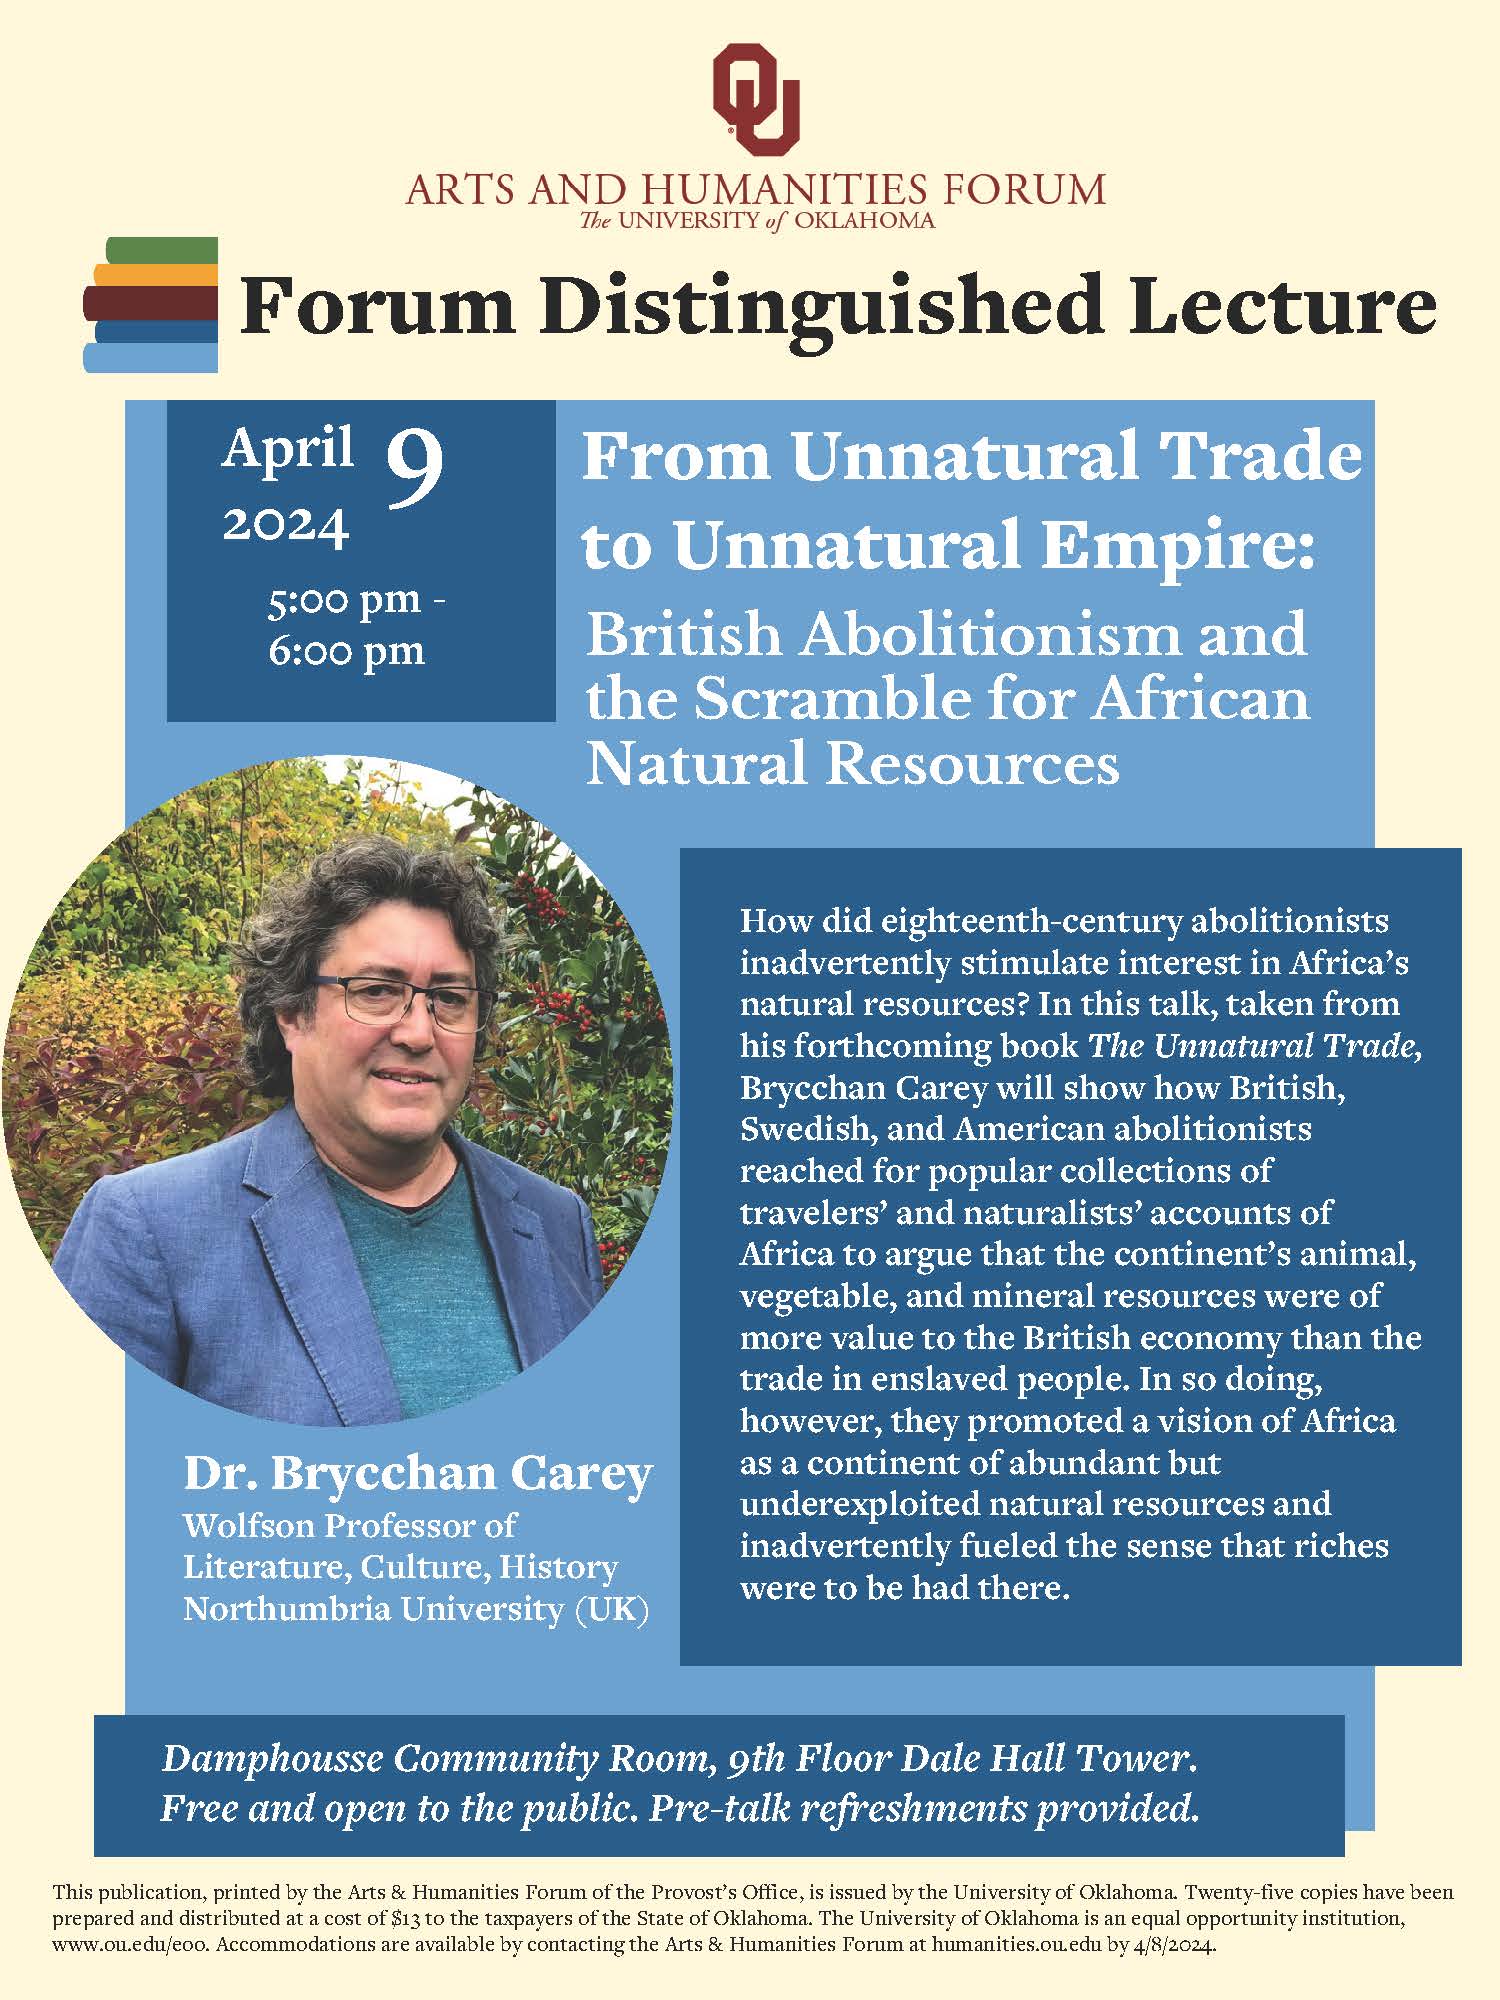 OU Arts and Humanities Forum, The University of Oklahoma. Forum Distinguished Lecture; APril 9, 2024 5:00 pm - 6:00 pm. From Unnatural Trade to Unnatural Empire: British Abolitionism and the Scramble for African Natural Resources. How did eighteenth-century abolitionists inadvertently stimulate interest in Africa's natural resources? In this talk, taken from his forthcoming book The Unnatural Trade, Brycchan Carey will show how British, Swedish, and American abolitionists reached for popular collections of travelers' and naturalists' accounts of Africa to argue that the continent's animal, vegetable and mineral resources were of more value to the British economy than the trade in enslaved people. In so doing, however, they promoted a vision of Africa as a continent of abundant but underexploited natural resources and inadvertently fueled the sense that riches were to be had there. Dr. Brycchan Carey, Wolfson Professor of Literature, Culture, History; Northumbria University (UK). Damphousse Community Room, 9th Floor Dale Hall Tower. Free and open to the public. Pre-talk refreshments provided. This publication, printed by the Arts & Humanities Forum of the Provost's Office, is issued by the University of Oklahoma. Twenty-five copies have been prepared and distributed at a cost of $13 to the taxpayers of the State of Oklahoma. The University of Oklahoma is an equal opportunity institution, www.ou.edu/eoo . Accommodations are available by contacting the Arts & Humanities Forum at humanities.ou.edu by 4/8/2024